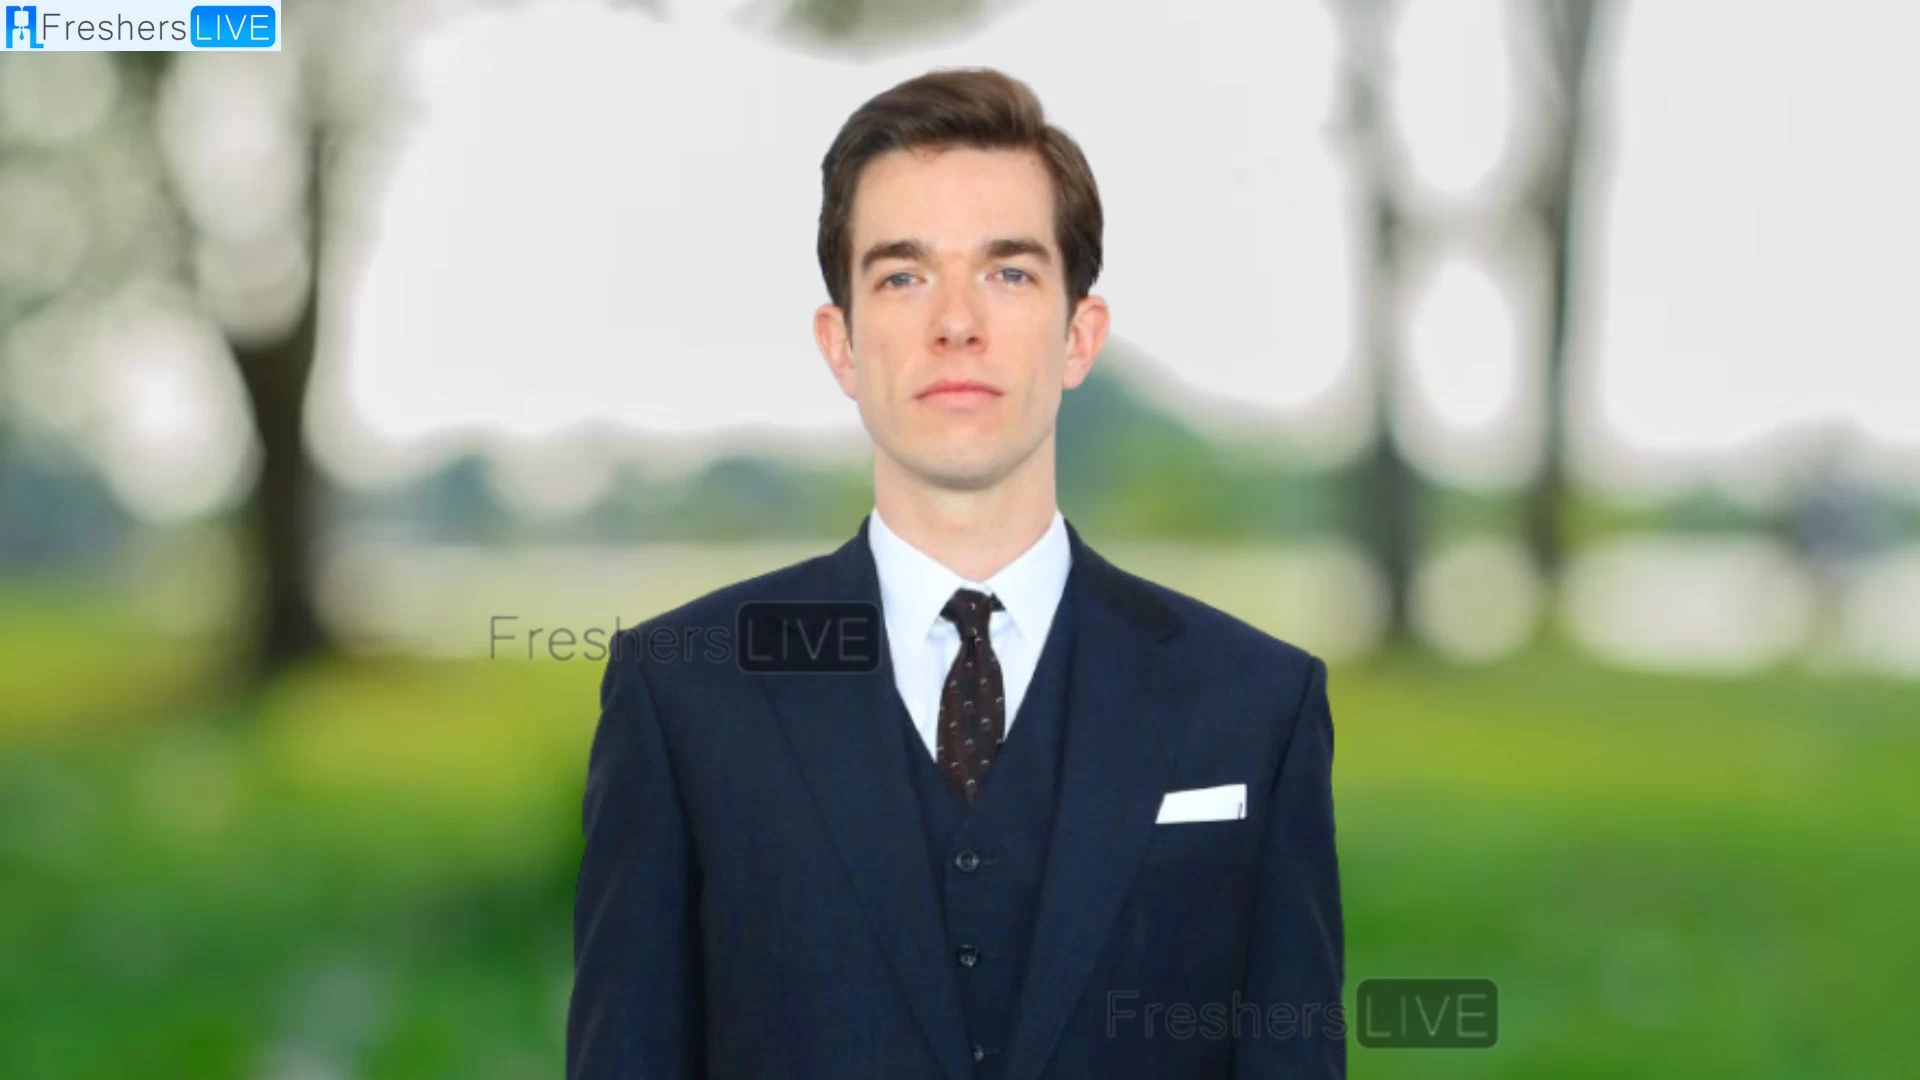 John Mulaney Presale Code 2023, How to Get the Tickets?